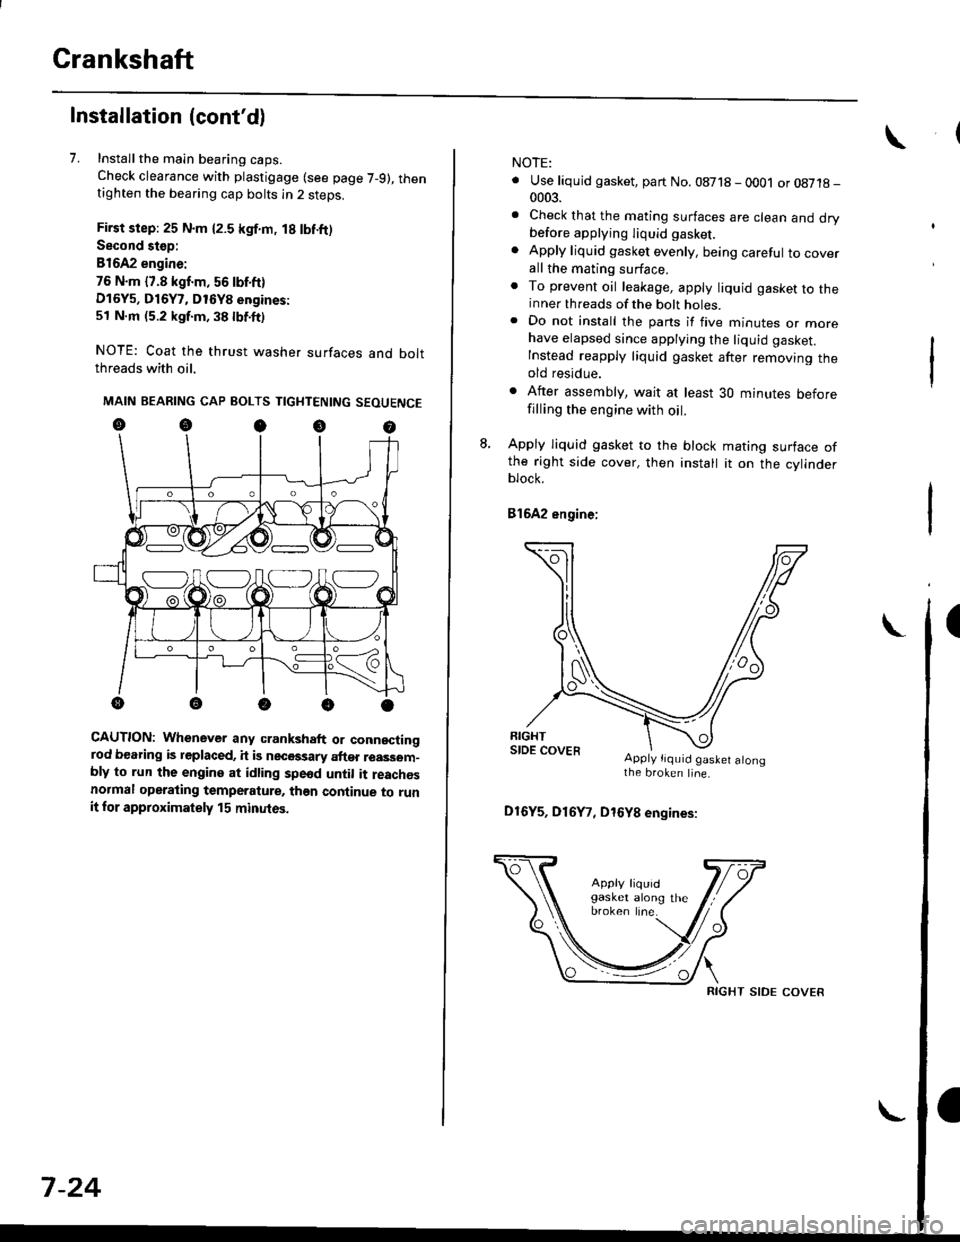 HONDA CIVIC 1997 6.G Workshop Manual Crankshaft
Installation (contd)
7. Installthe main bearing caps.
Check clearance with plastigage (see page 7-9), thentighten the bearing cap bolts in 2 steps.
First step: 25 N.m {2.5 kgf.m, 18 lbf.ft